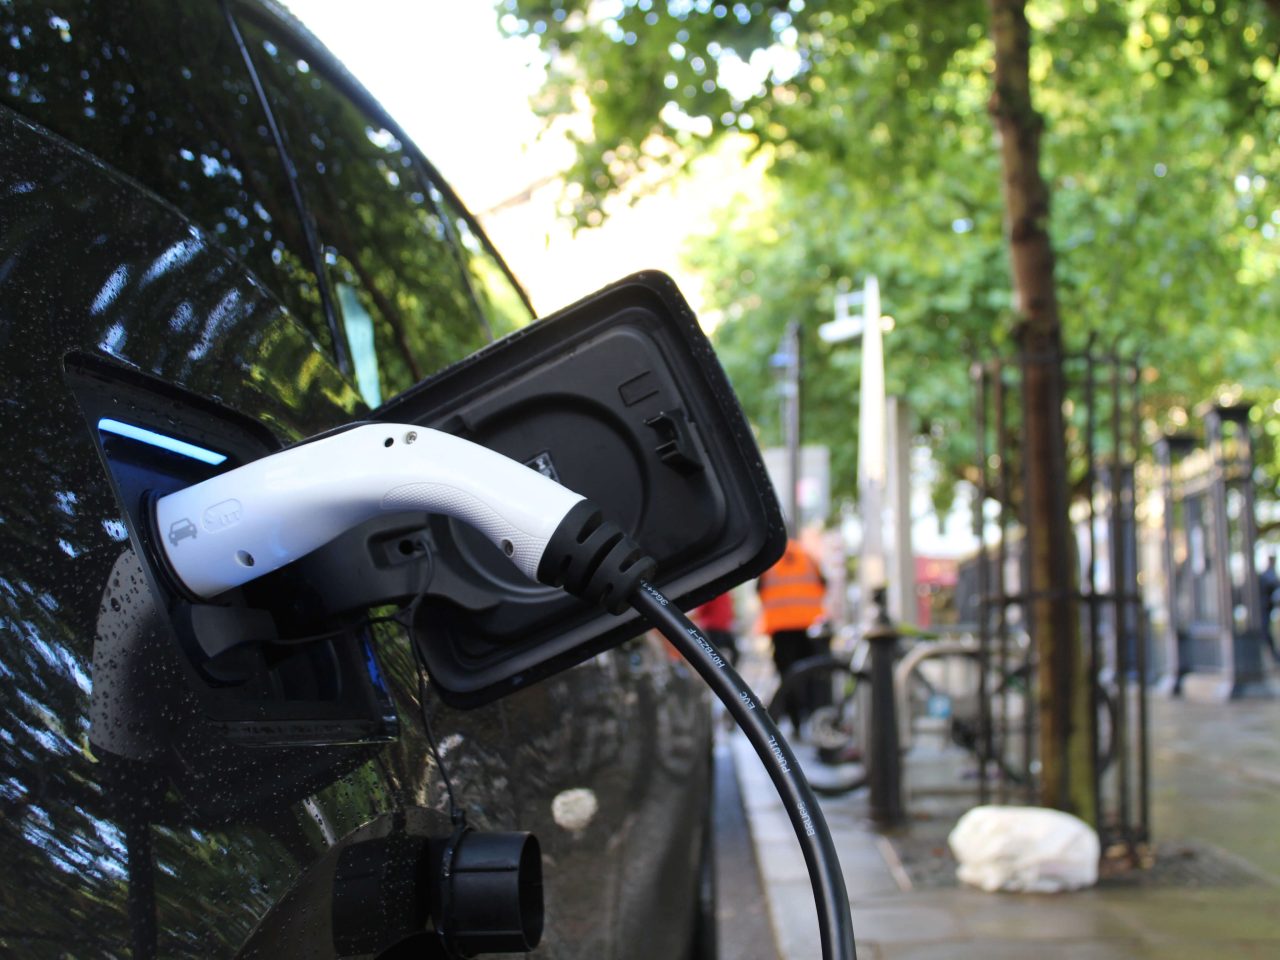 Air and water filtration solutions for clean e-mobility, by MANN+HUMMEL